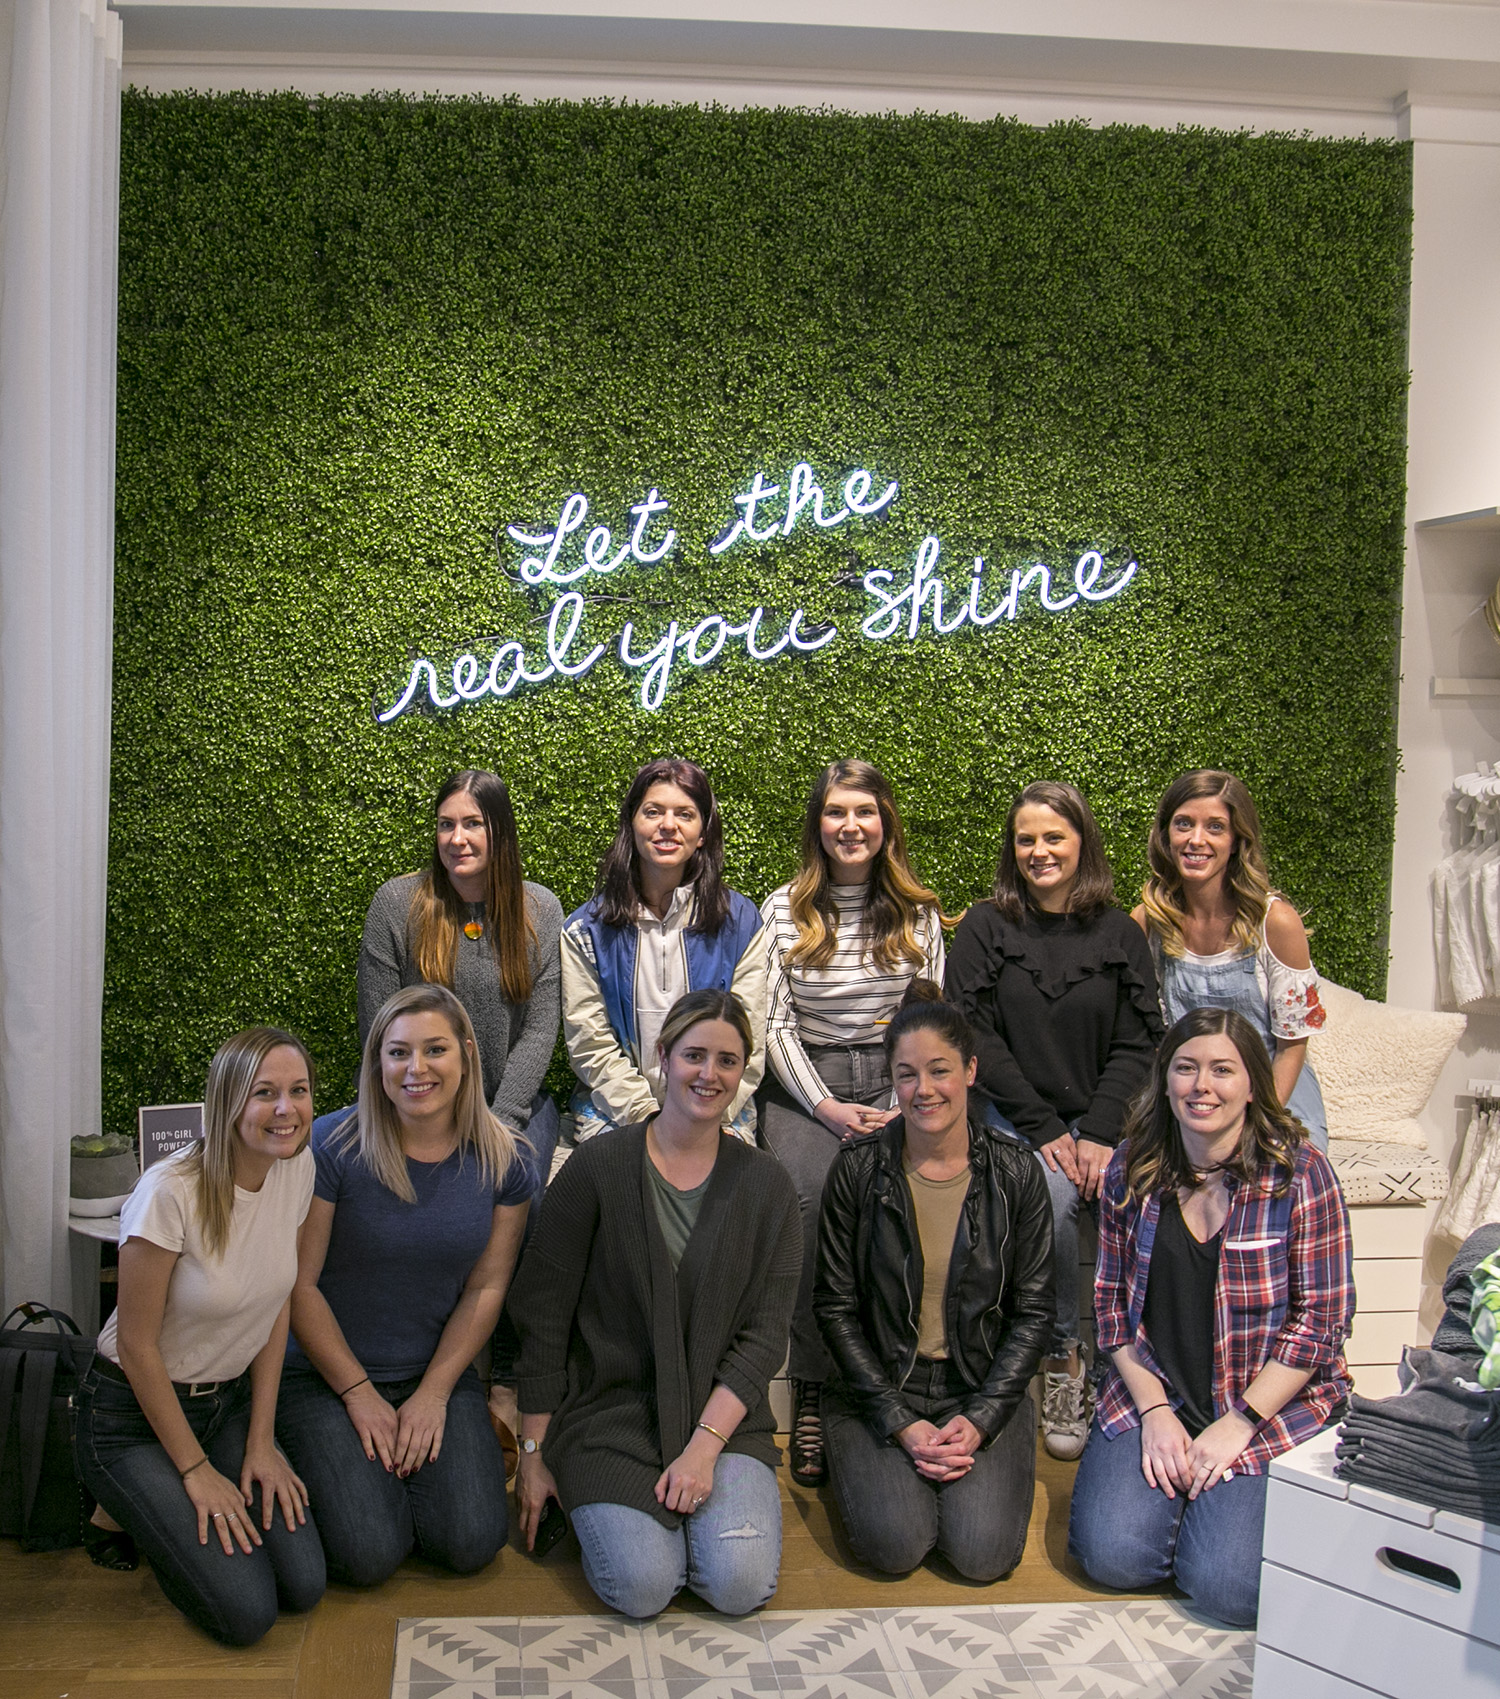 Introducing an all-new Aerie store design! - #AerieREAL Life